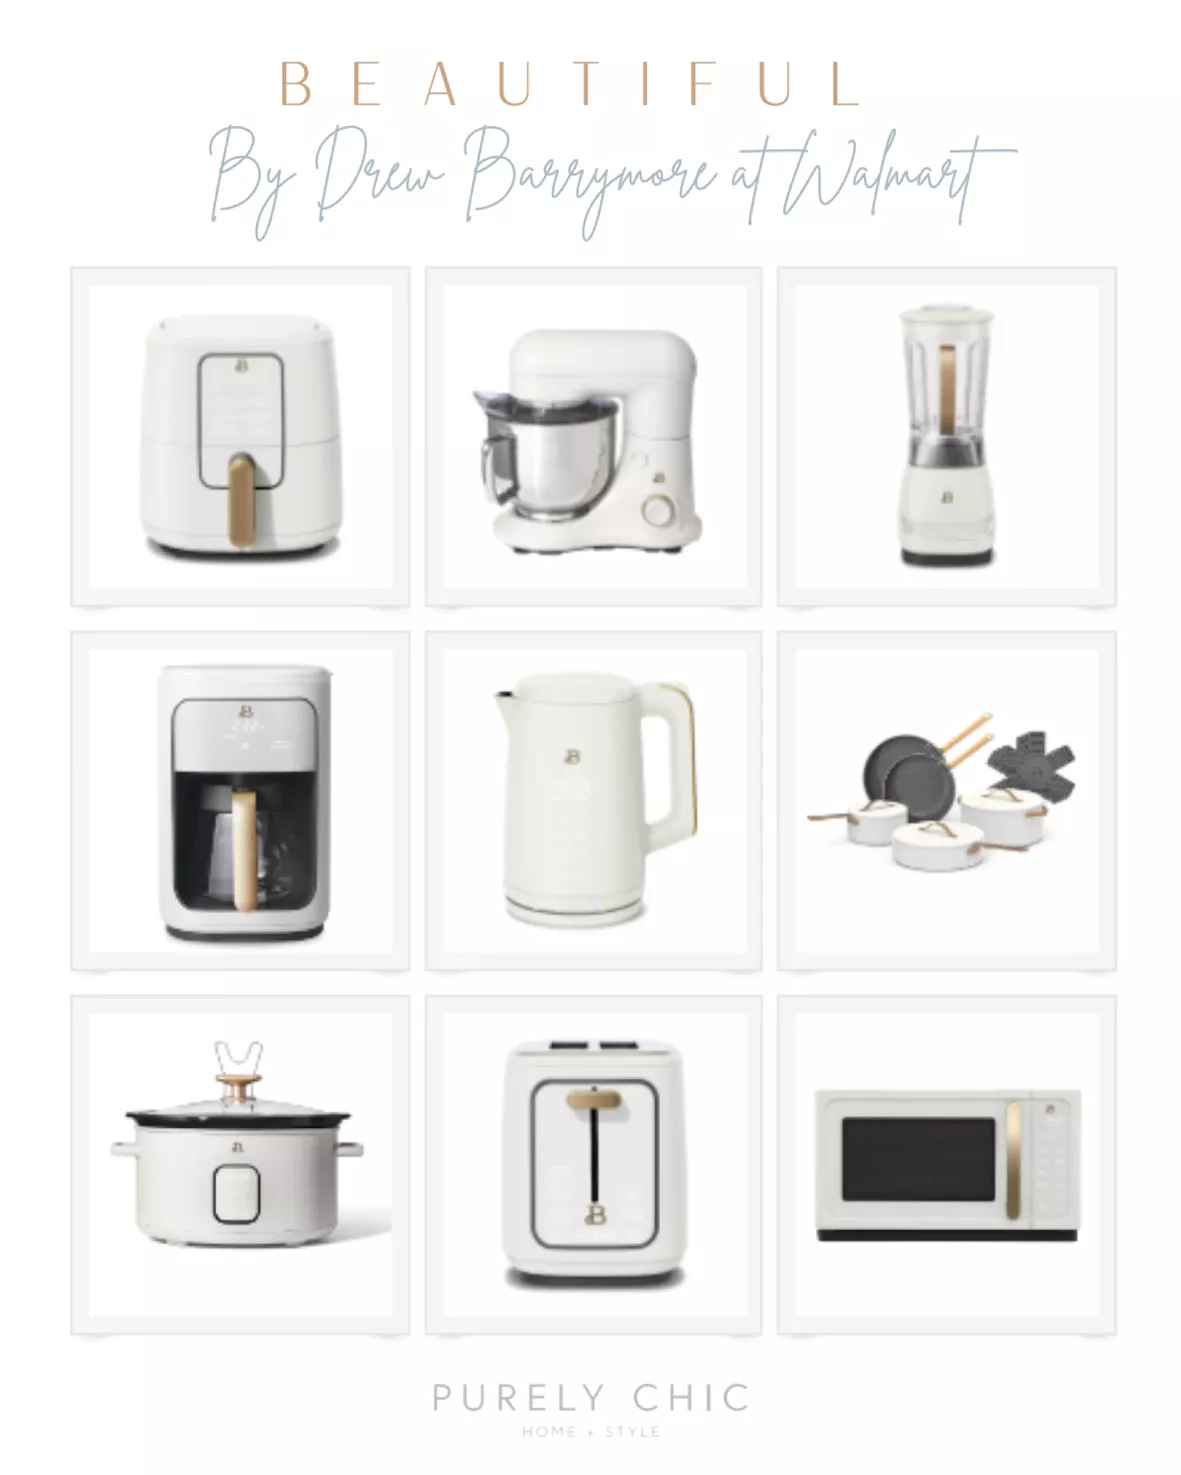 Drew Barrymore's Beautiful 14-cup coffee maker is back in stock at Walmart